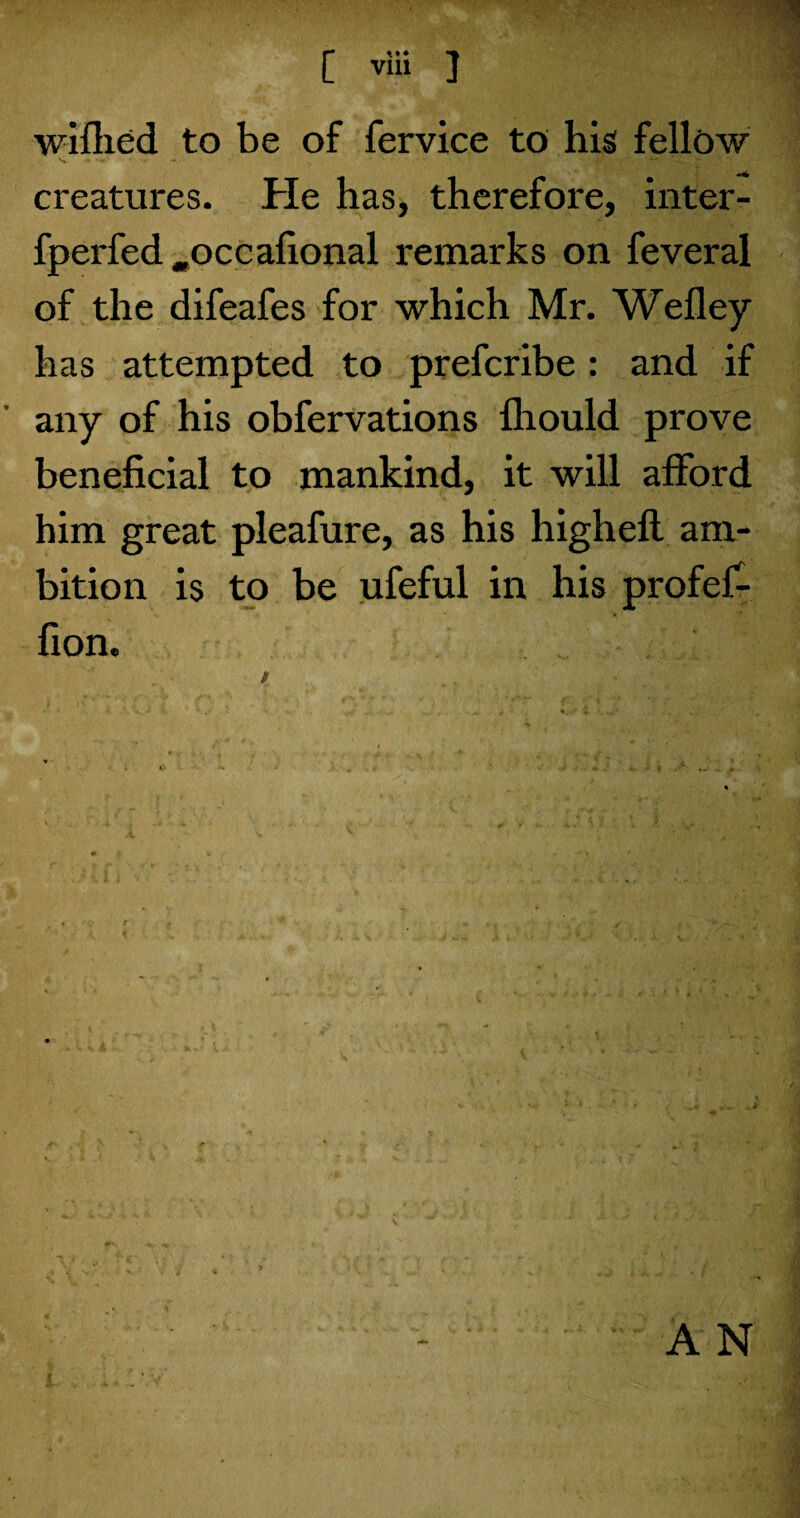 wifhed to be of fervice to his fellow creatures. He has, therefore, inter- fperfed .occafional remarks on feveral of the difeafes for which Mr. Wefley has attempted to prefcribe: and if any of his obfervations fliould prove beneficial to mankind, it will afford him great pleafure, as his highefl am¬ bition is to be ufeful in his profef- fion.